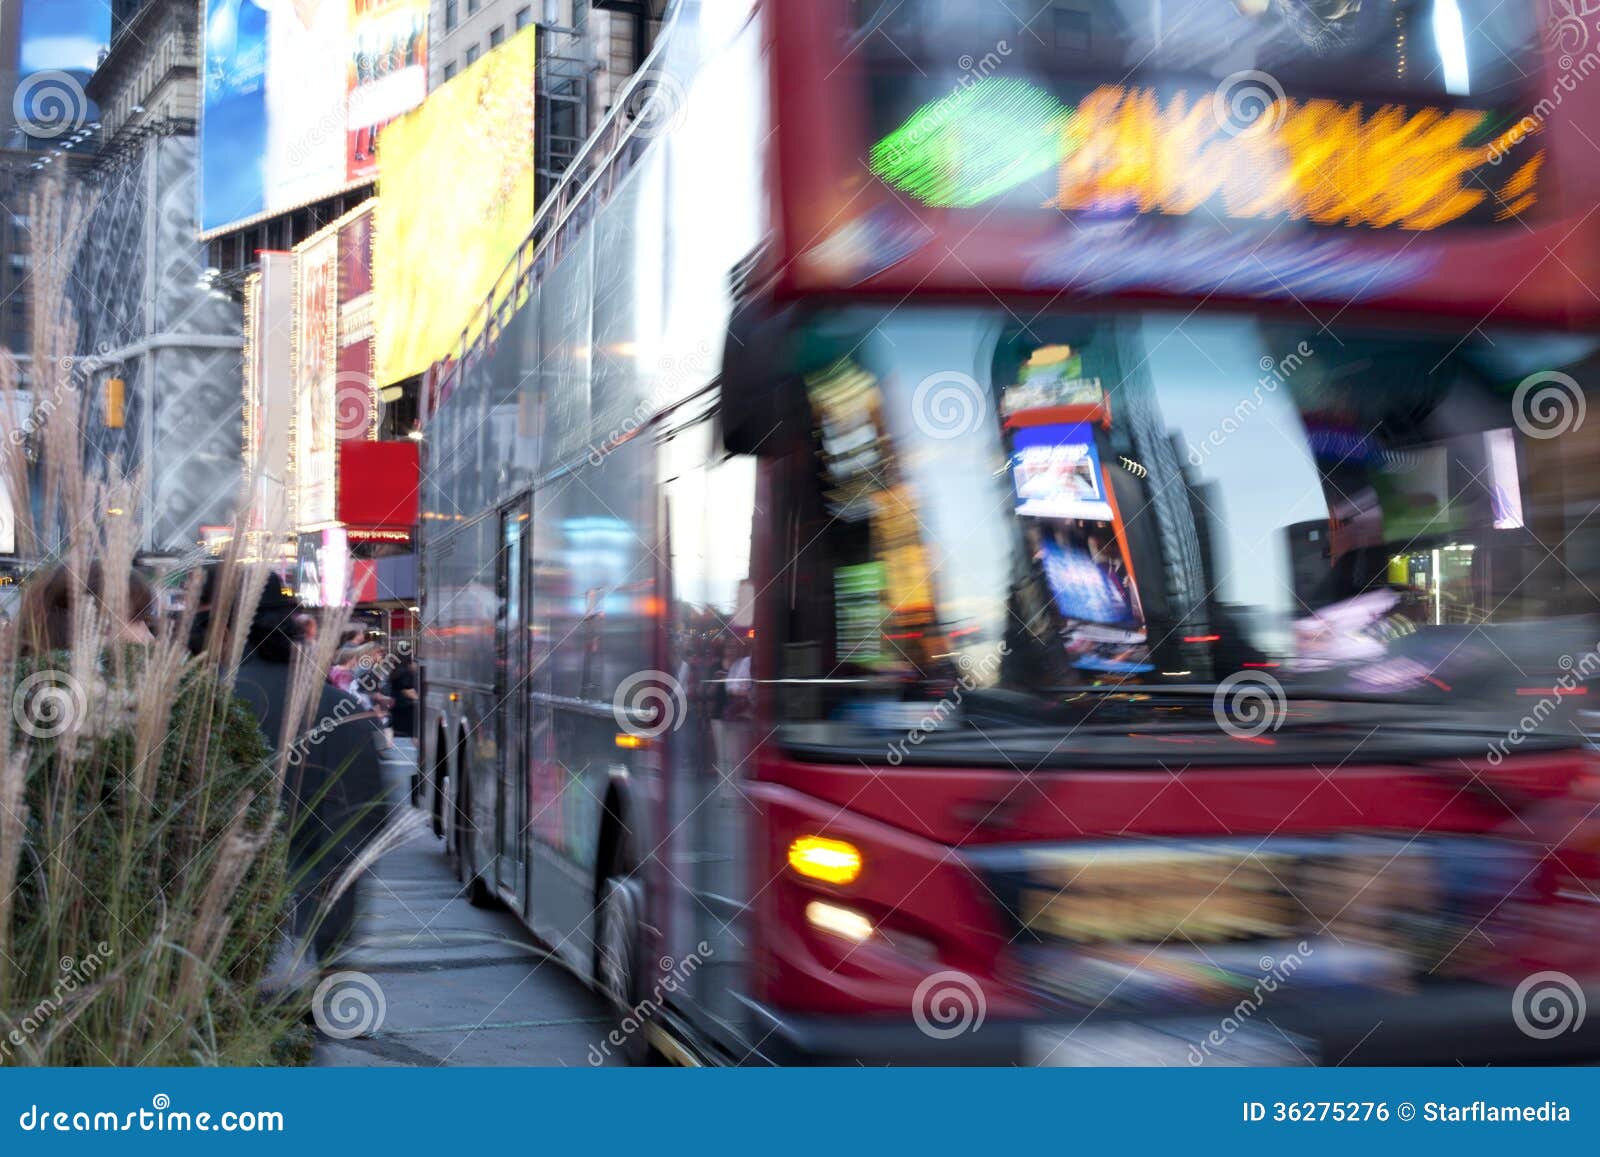 bus on times square nyc